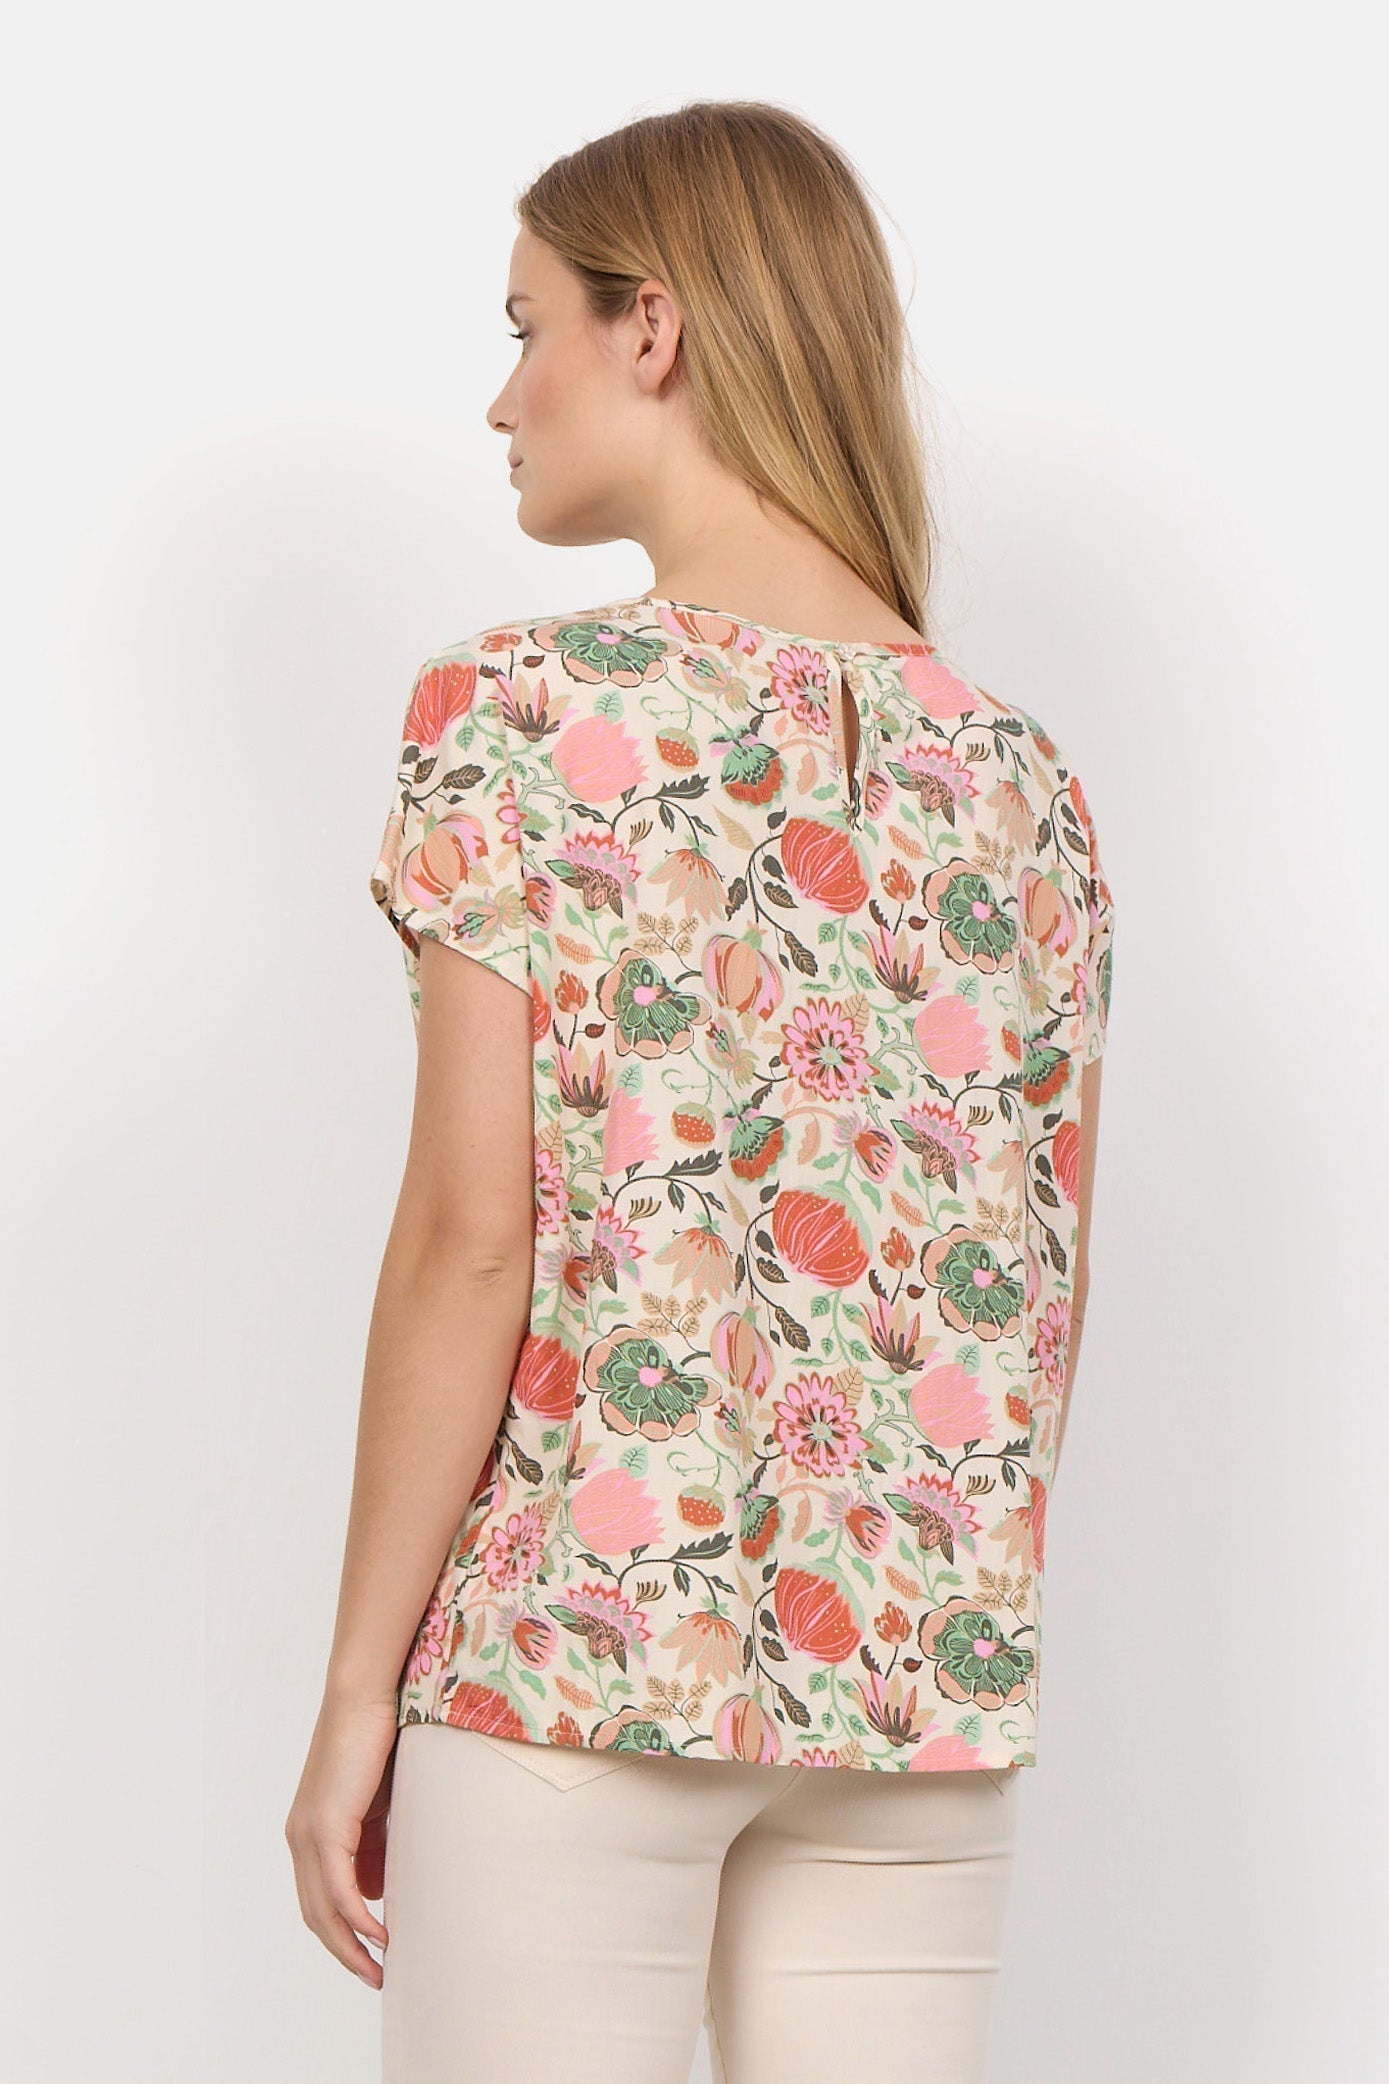 Back view of Soya Concept (40579) Women's Short Sleeve Graphic Floral Blouse in a Peach Floral Print With PInk & Green Hues over a Cream Background 